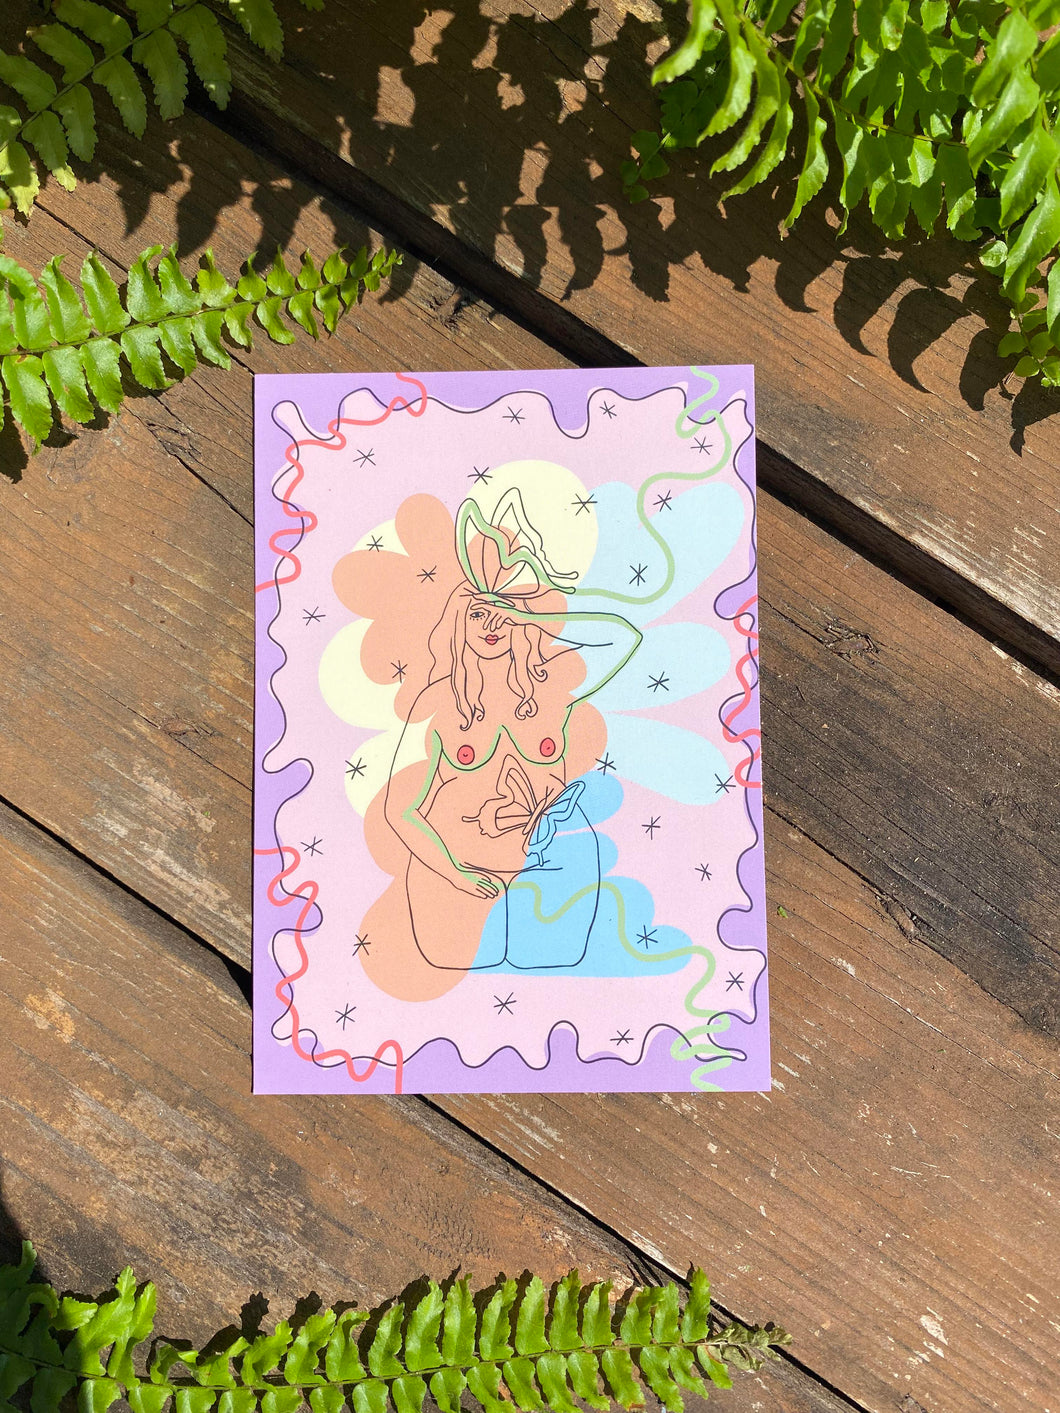 A6 POSTCARDS - Body Normative, Fun, Relatable, Positive, Trippy, Cat Postcards | Postcard Set | Notecards